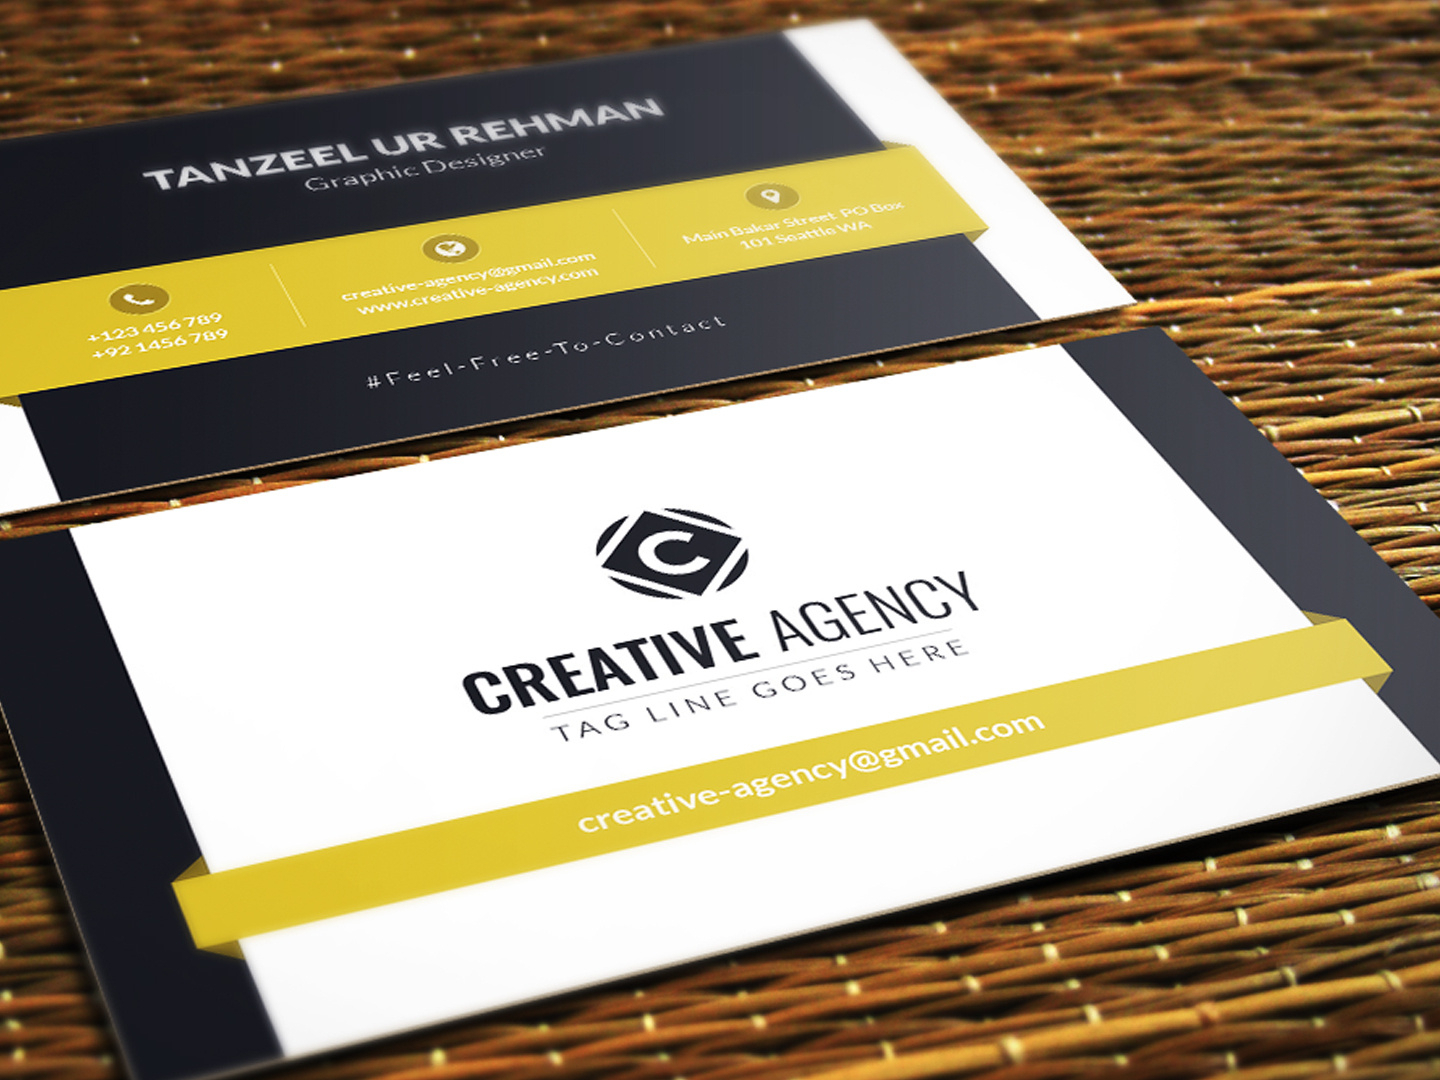 Business Cards Template – Free Downloadtanzeel Ur Rehman With Visiting Card Templates Download